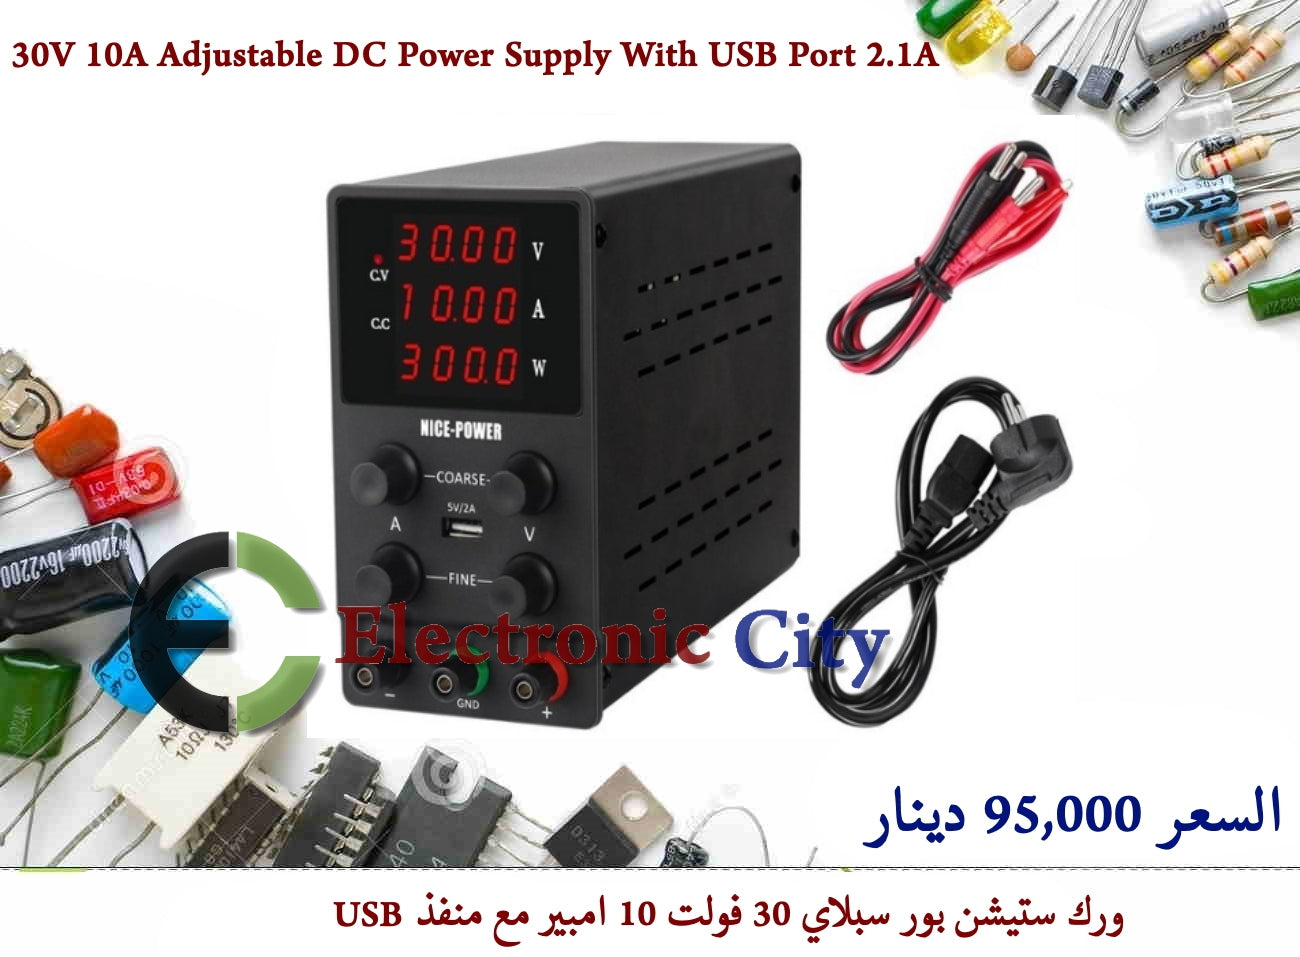 30V 10A Adjustable DC Power Supply With FINE And USB Port 2.1A  SPS3010